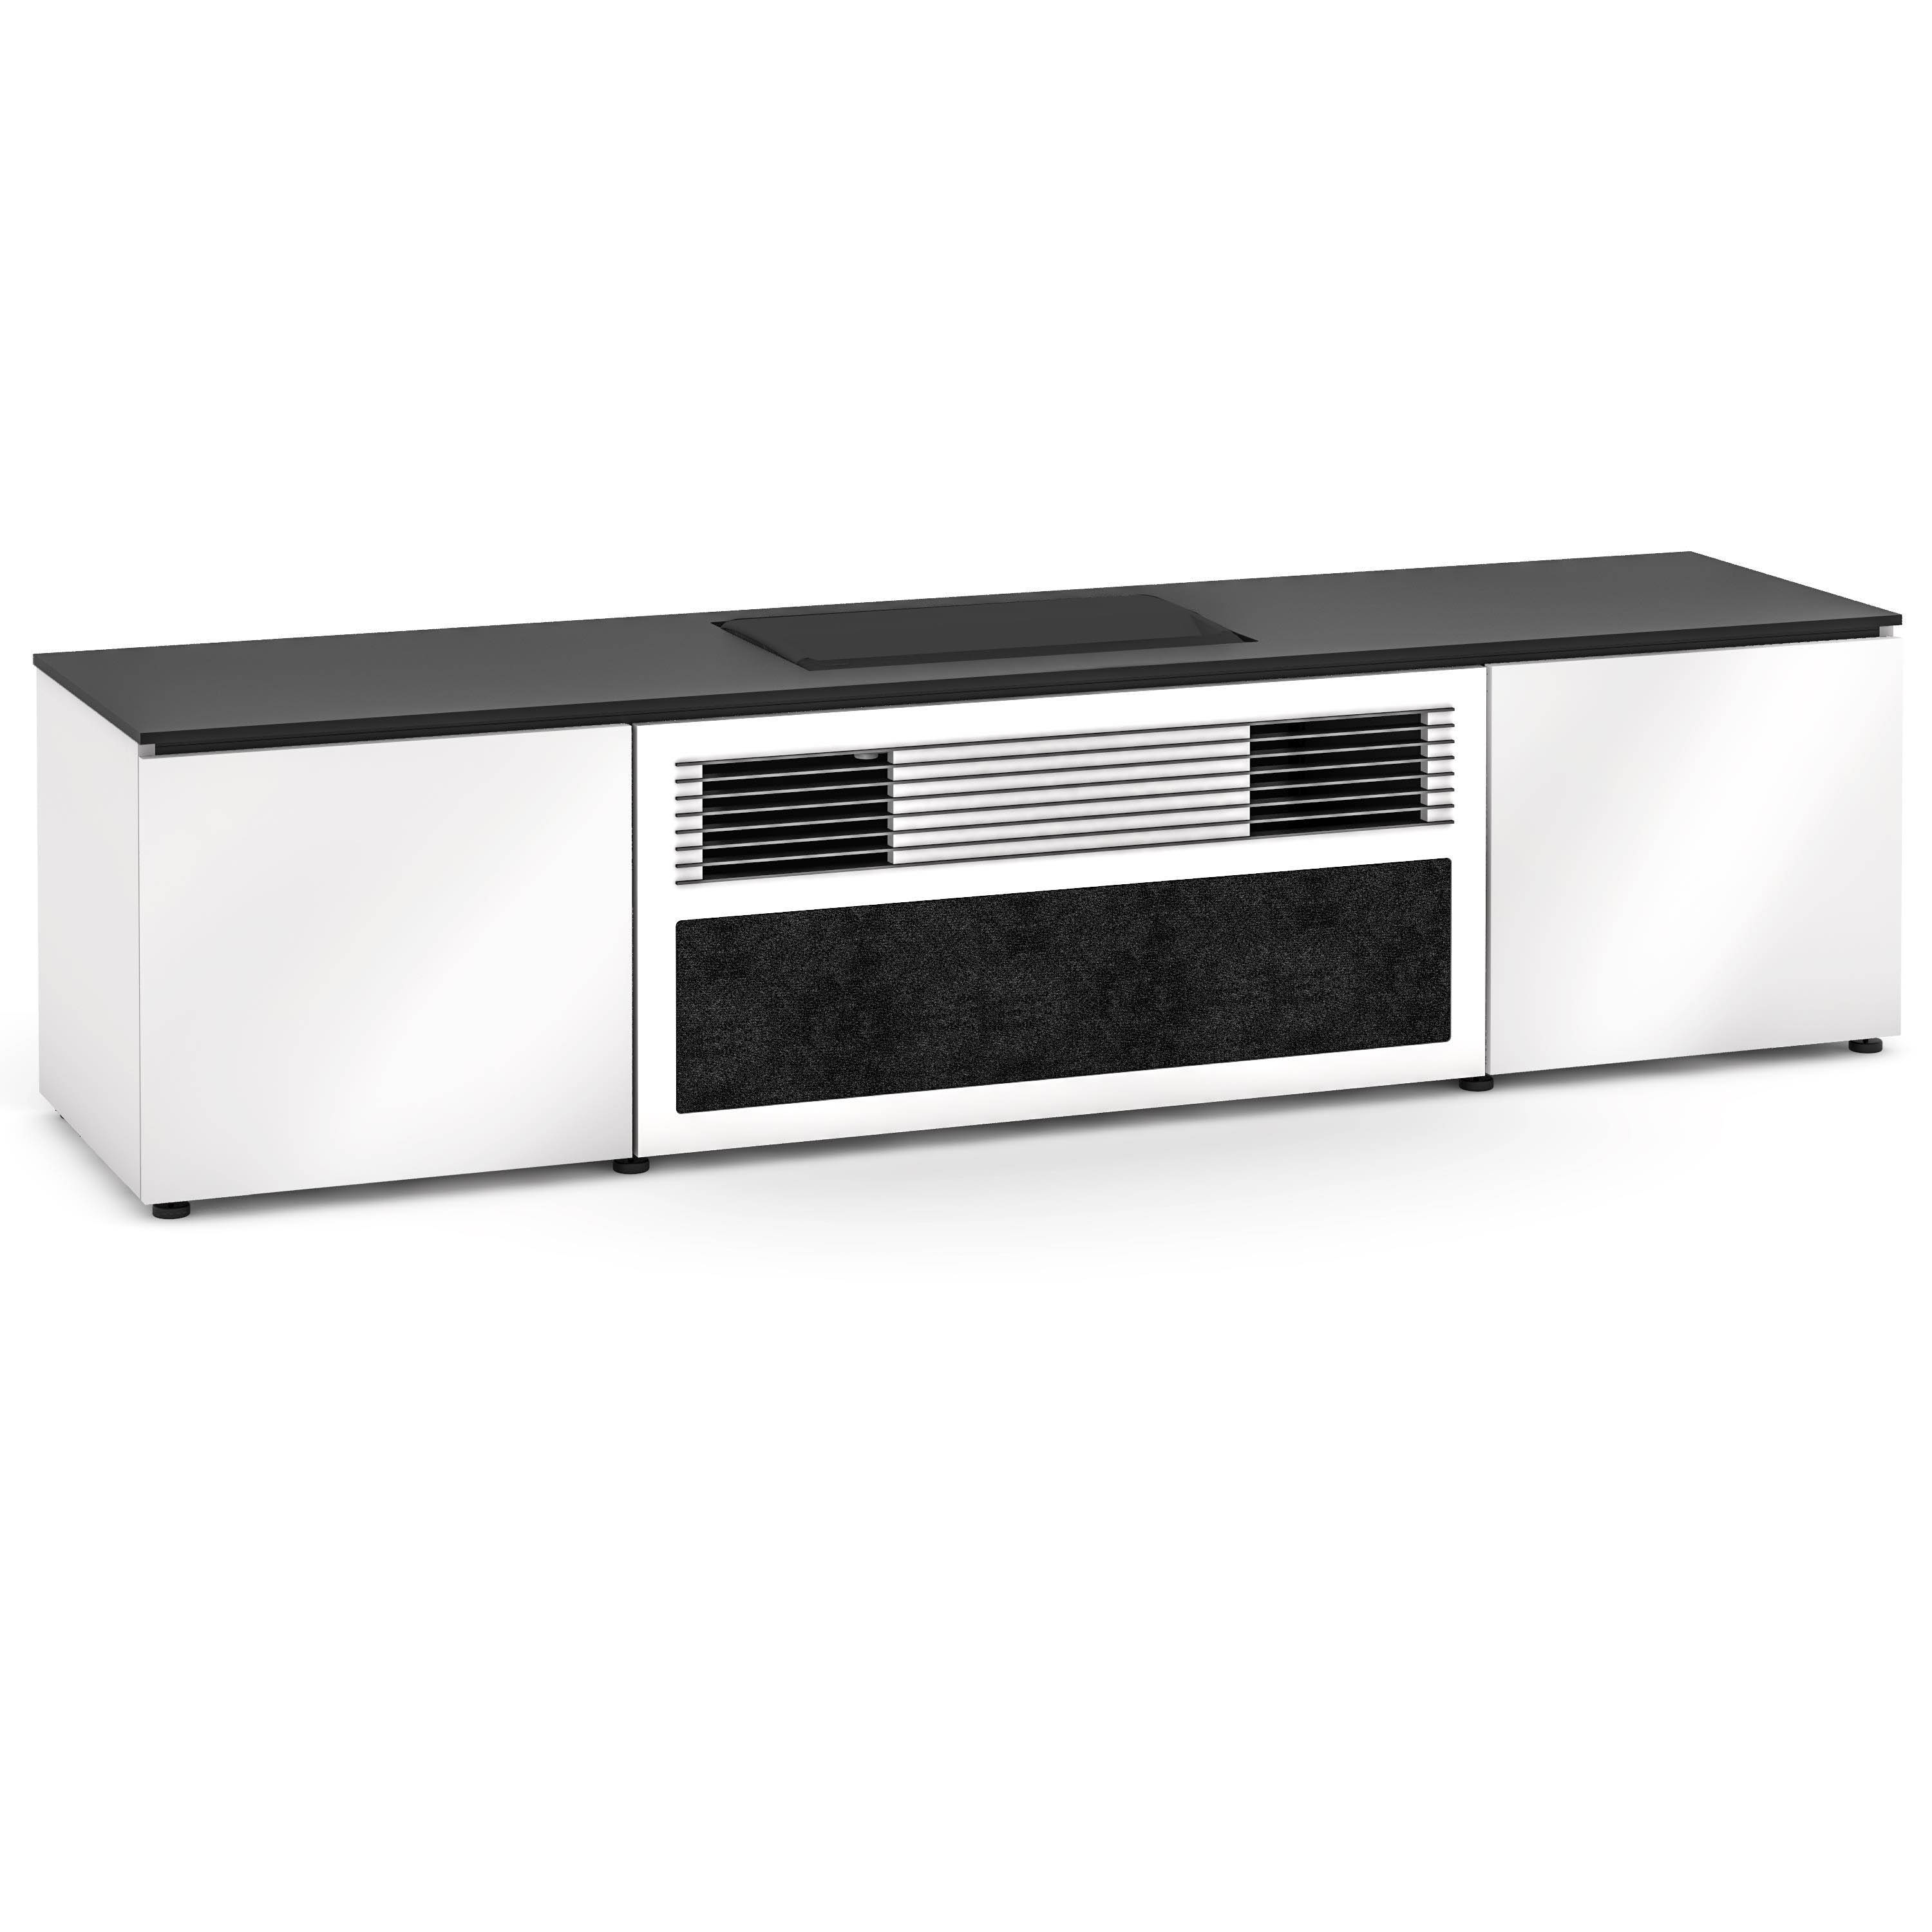 Salamander Designs Miami 245 Cabinet for integrated Formovie Theater UST Projector - Gloss White - X/FMT245MM/BK